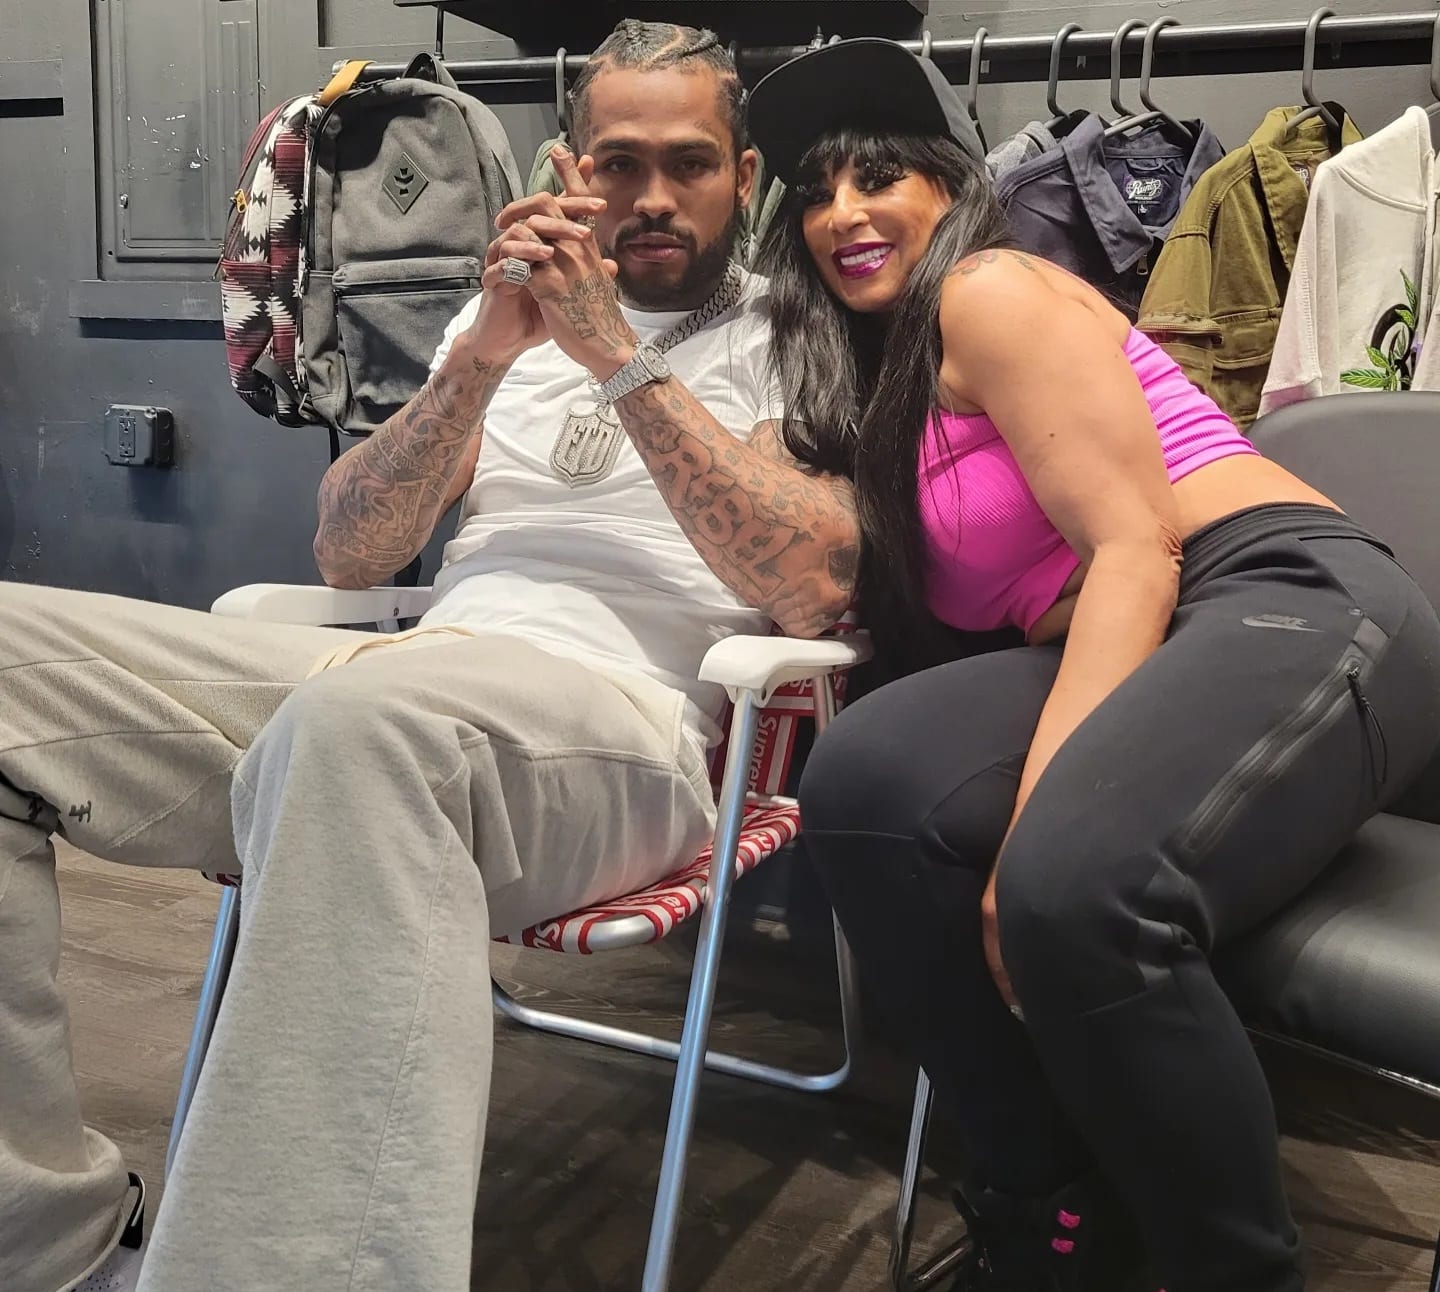 I Heart & EURweb.com's Jazmyn Summers with Dave East (from Instagram)